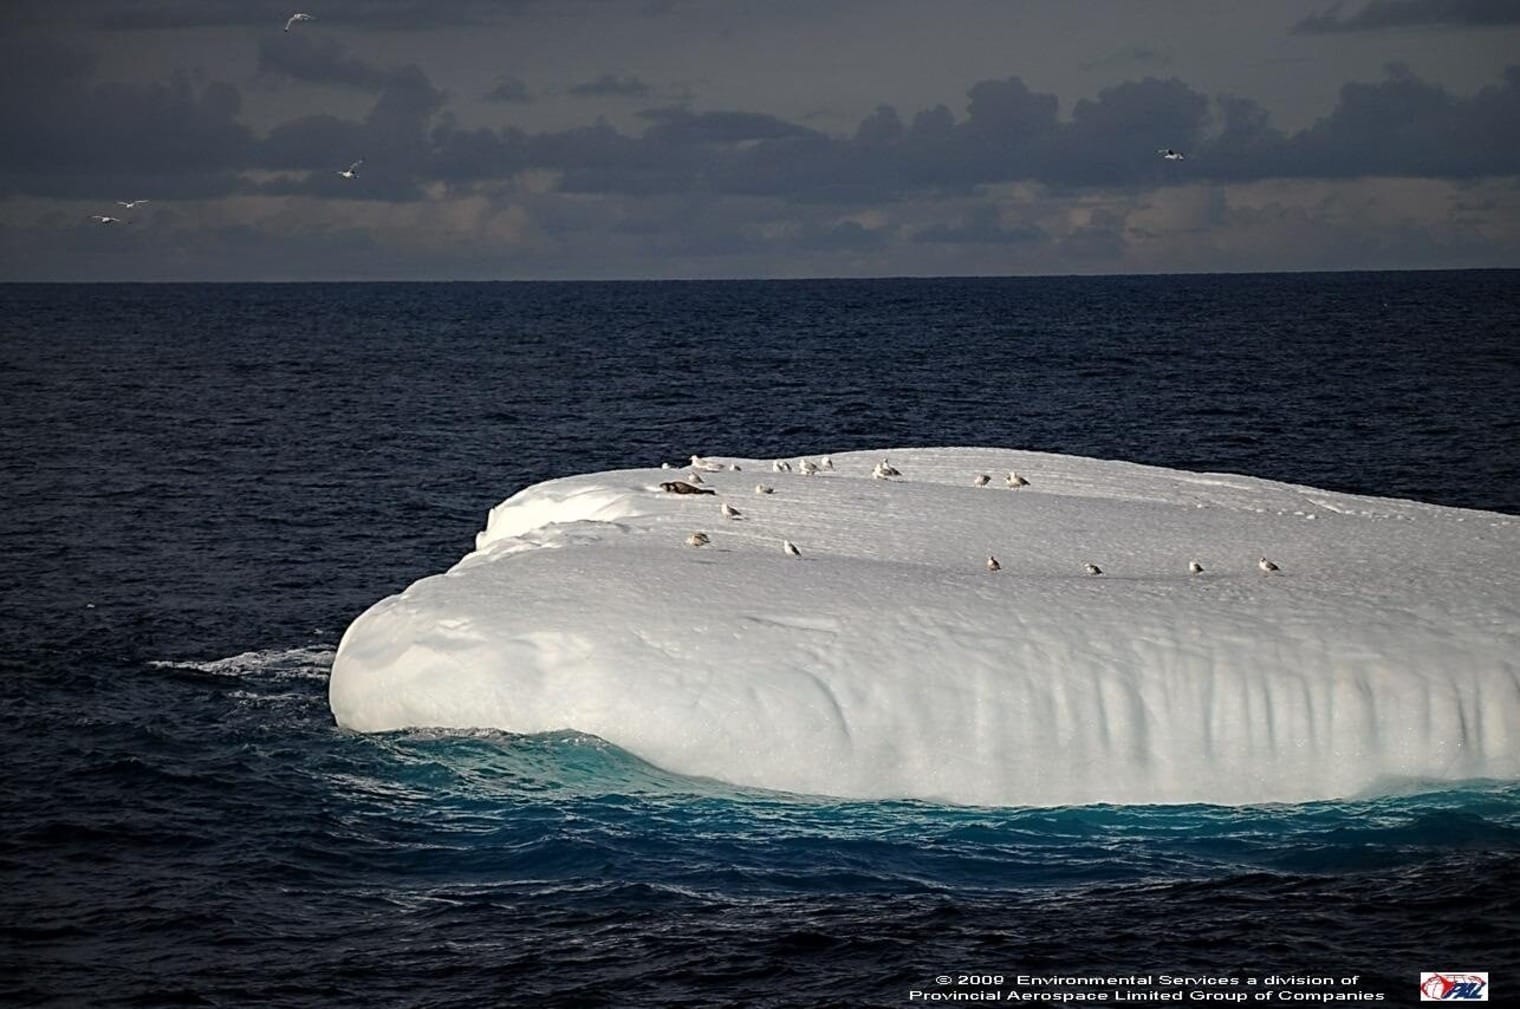 Photograph of Iceberg by the Environment Service Team at PAL Aerospace